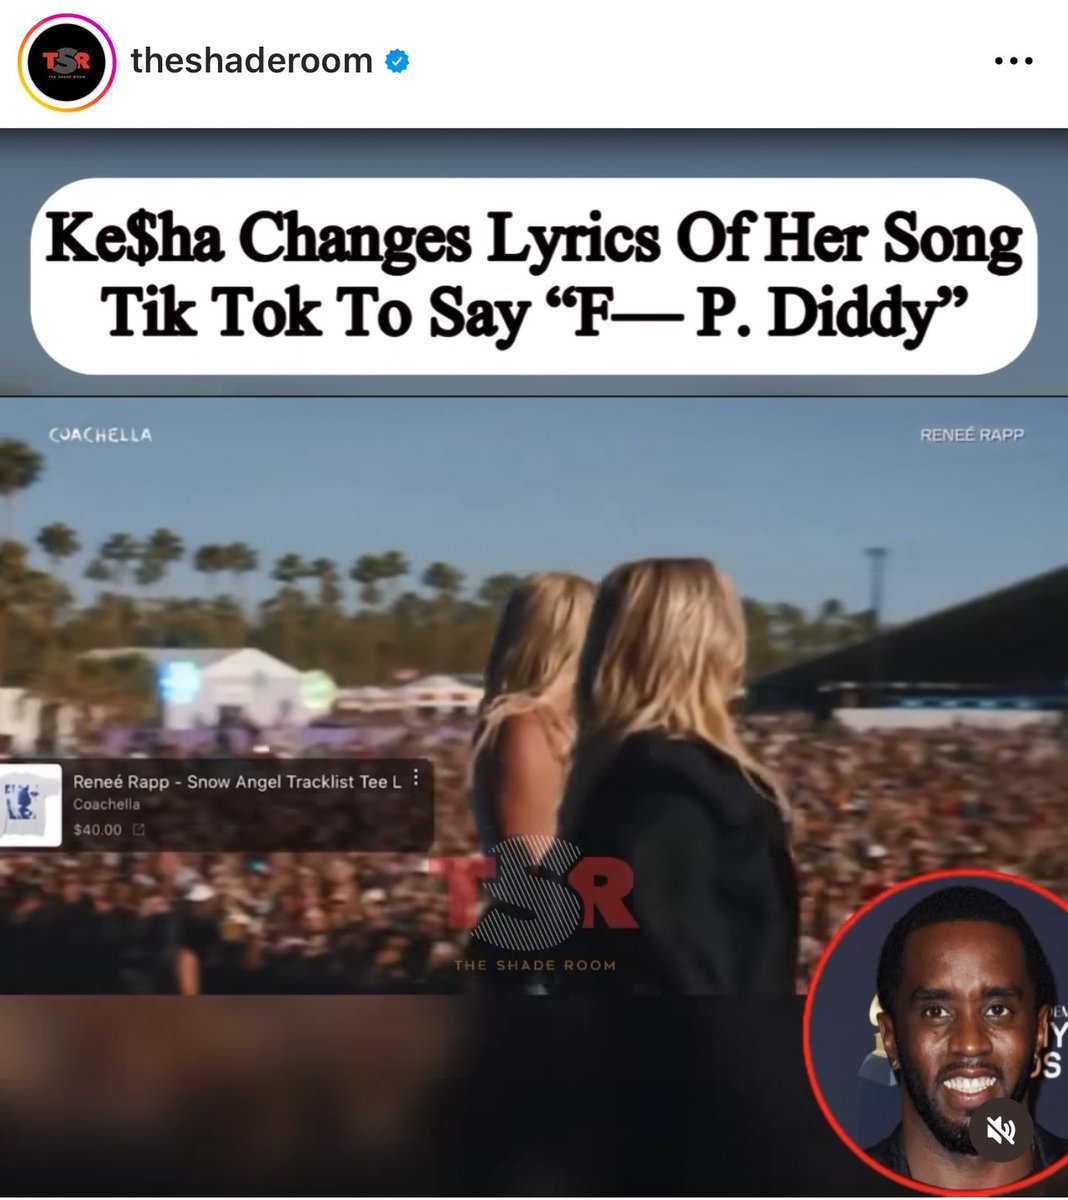 Kesha’s abuser has major connections to other abusers like P Diddy & Dan Schneider. He wrote the line & got Diddy in the studio for the song. Kesha has witnessed all lot of the evil in the industry & was blacklisted for coming forward, so she has every right to speak about this.